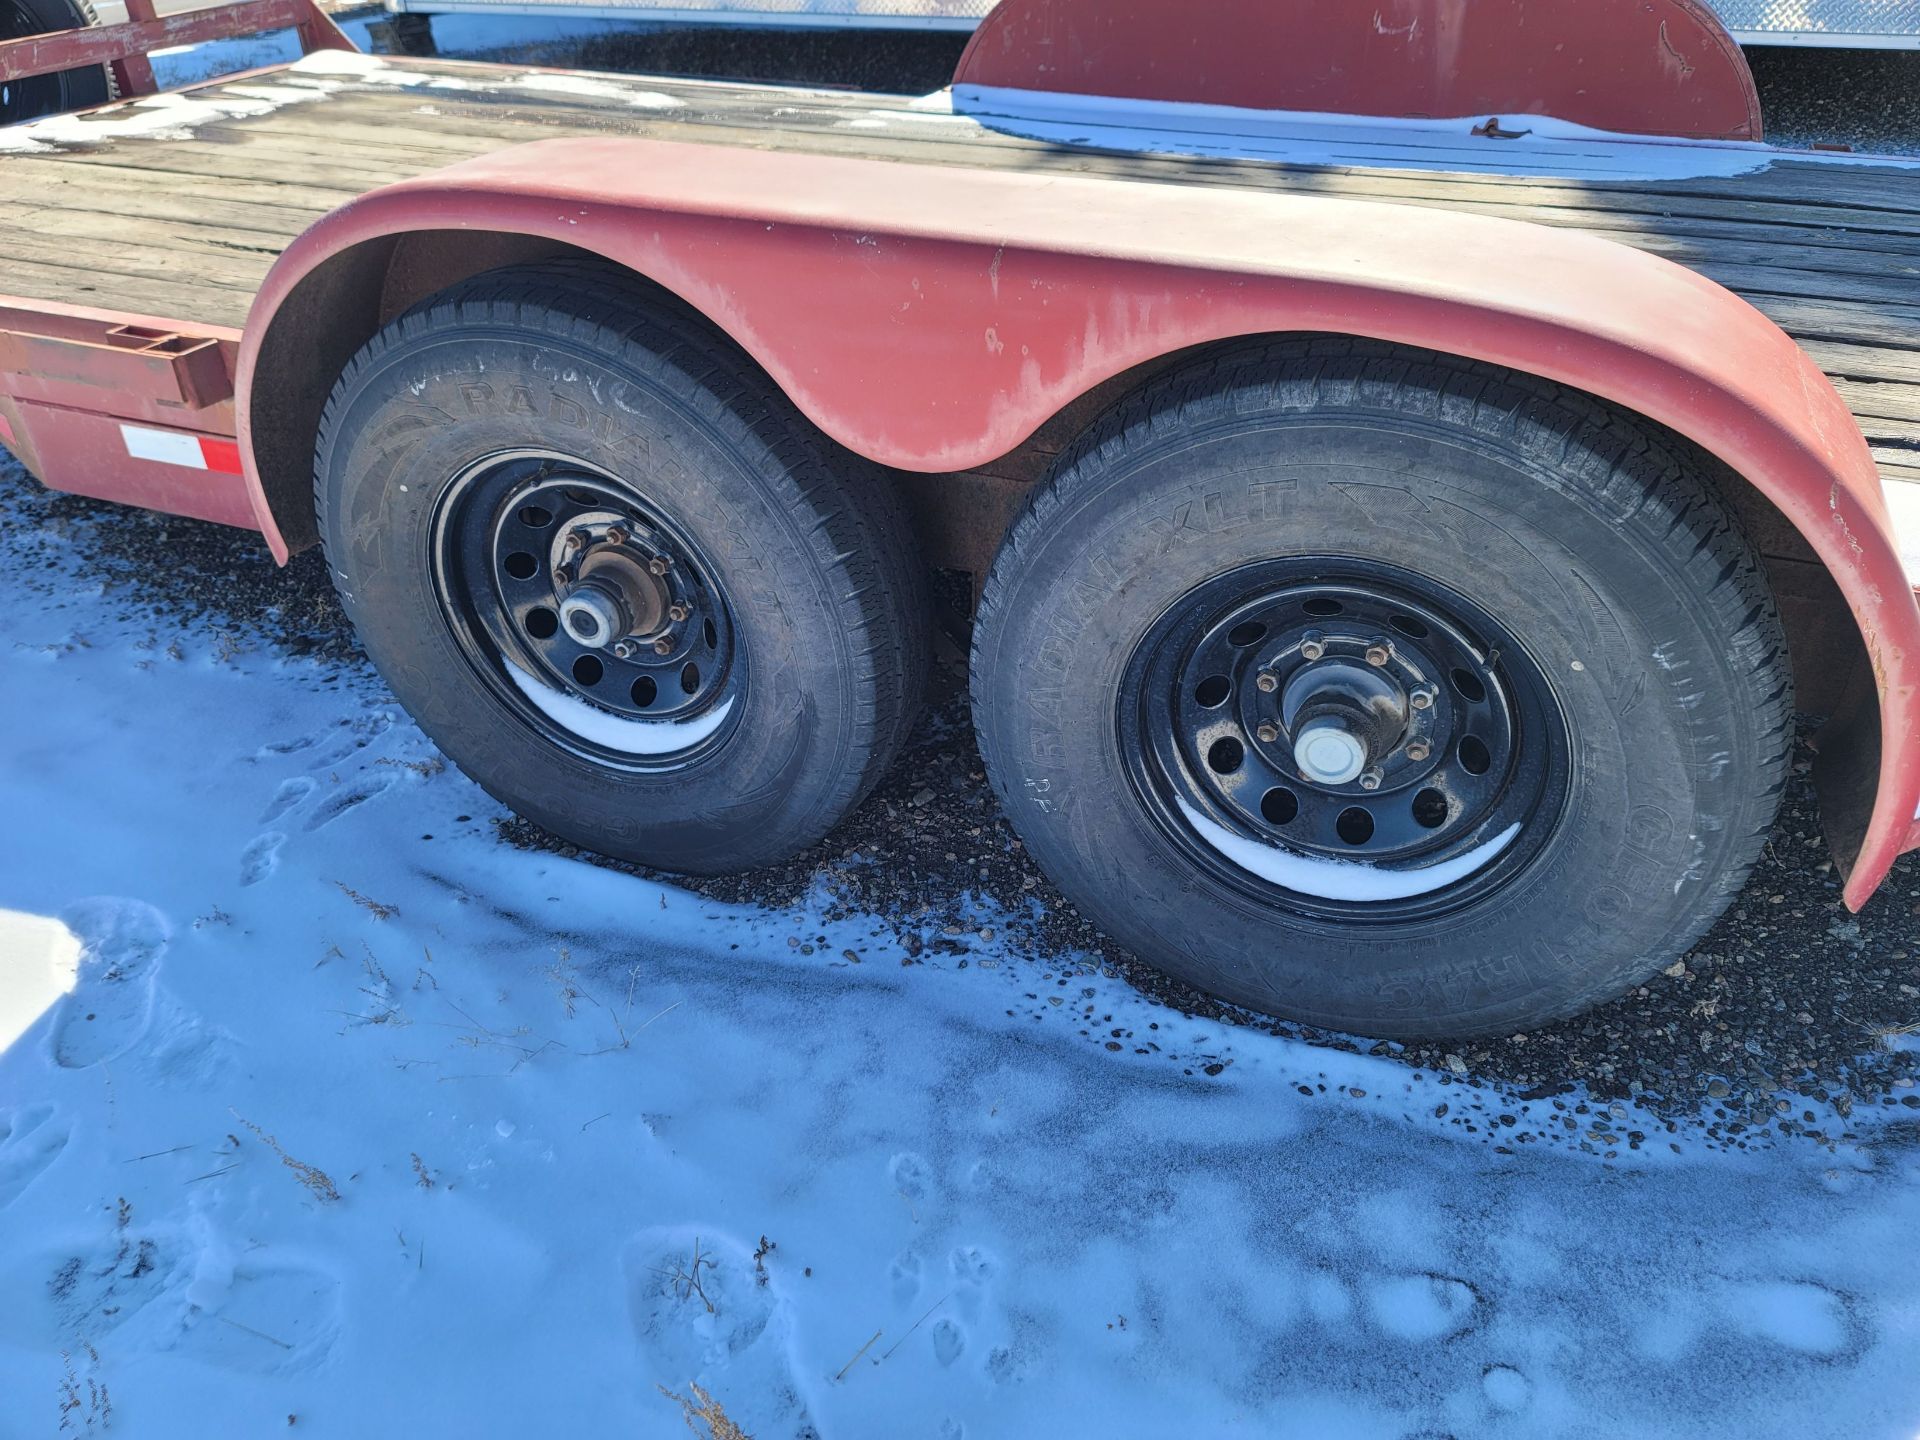 FLATBED TRAILER, 16' X 80", LOADING RAMP, DUAL AXLE, BUMPER PULL, SPARE TIRE, (2) 60" X 15" BED LOAD - Image 4 of 4